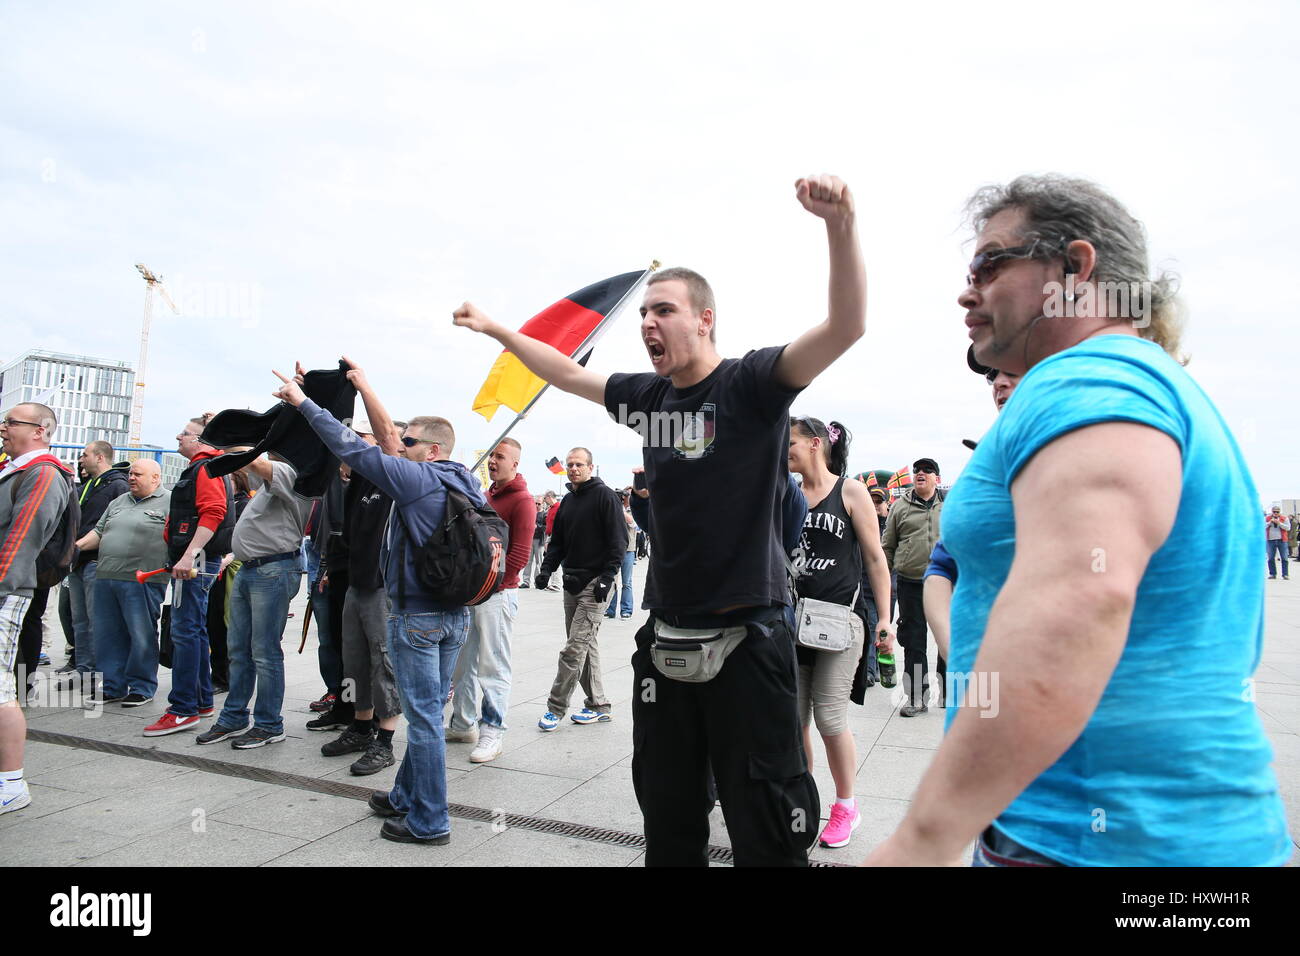 Berlin, Germany, May 9th, 2015: Antifa protesters clash with Pegida activists. Stock Photo